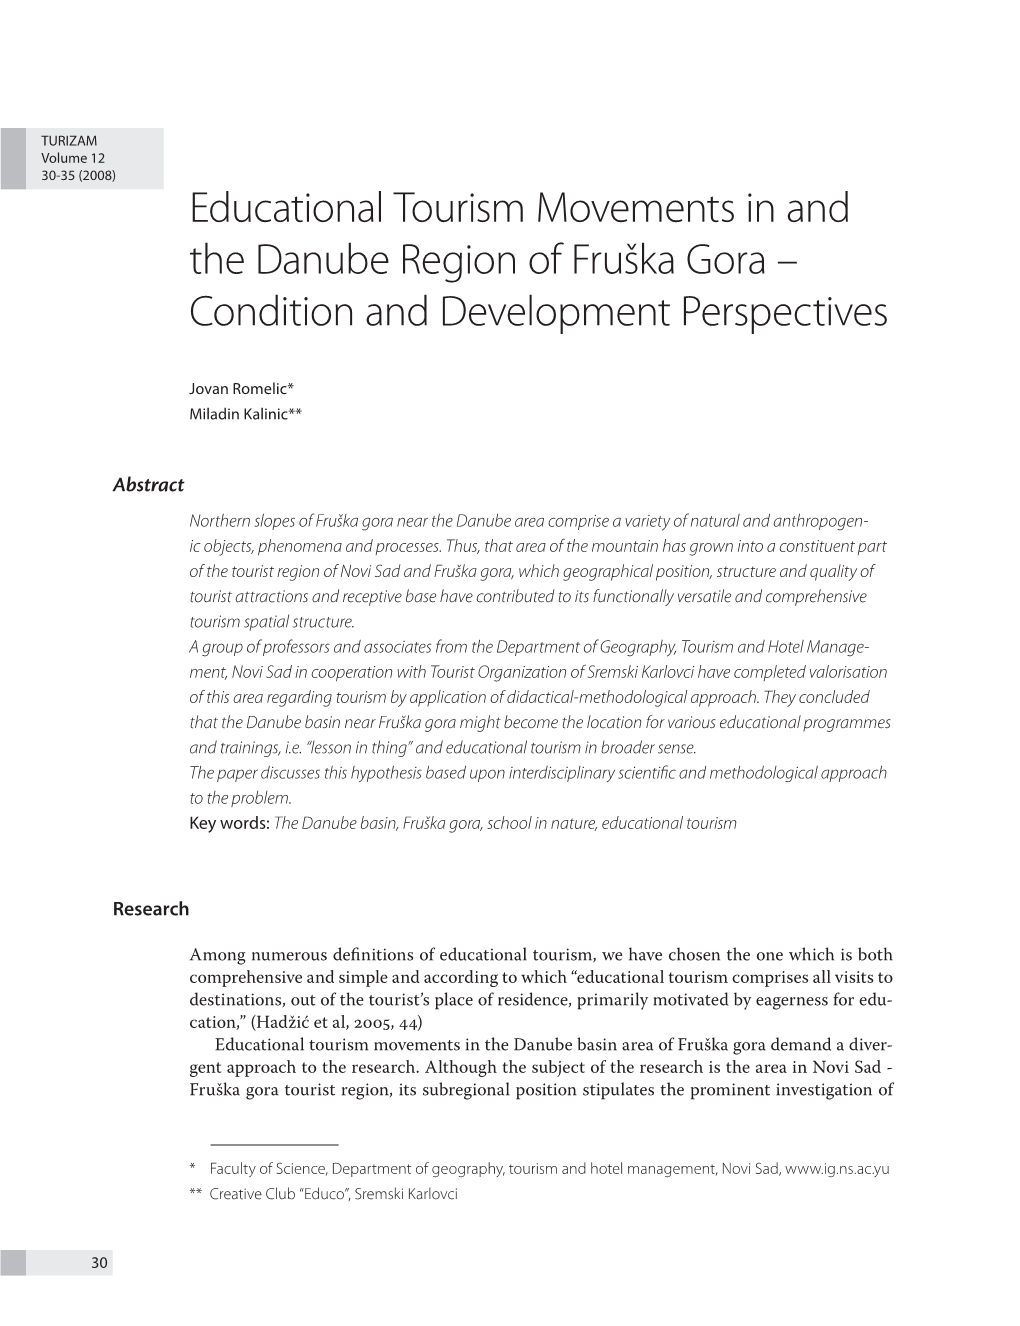 Educational Tourism Movements in and the Danube Region of Fruška Gora – Condition and Development Perspectives